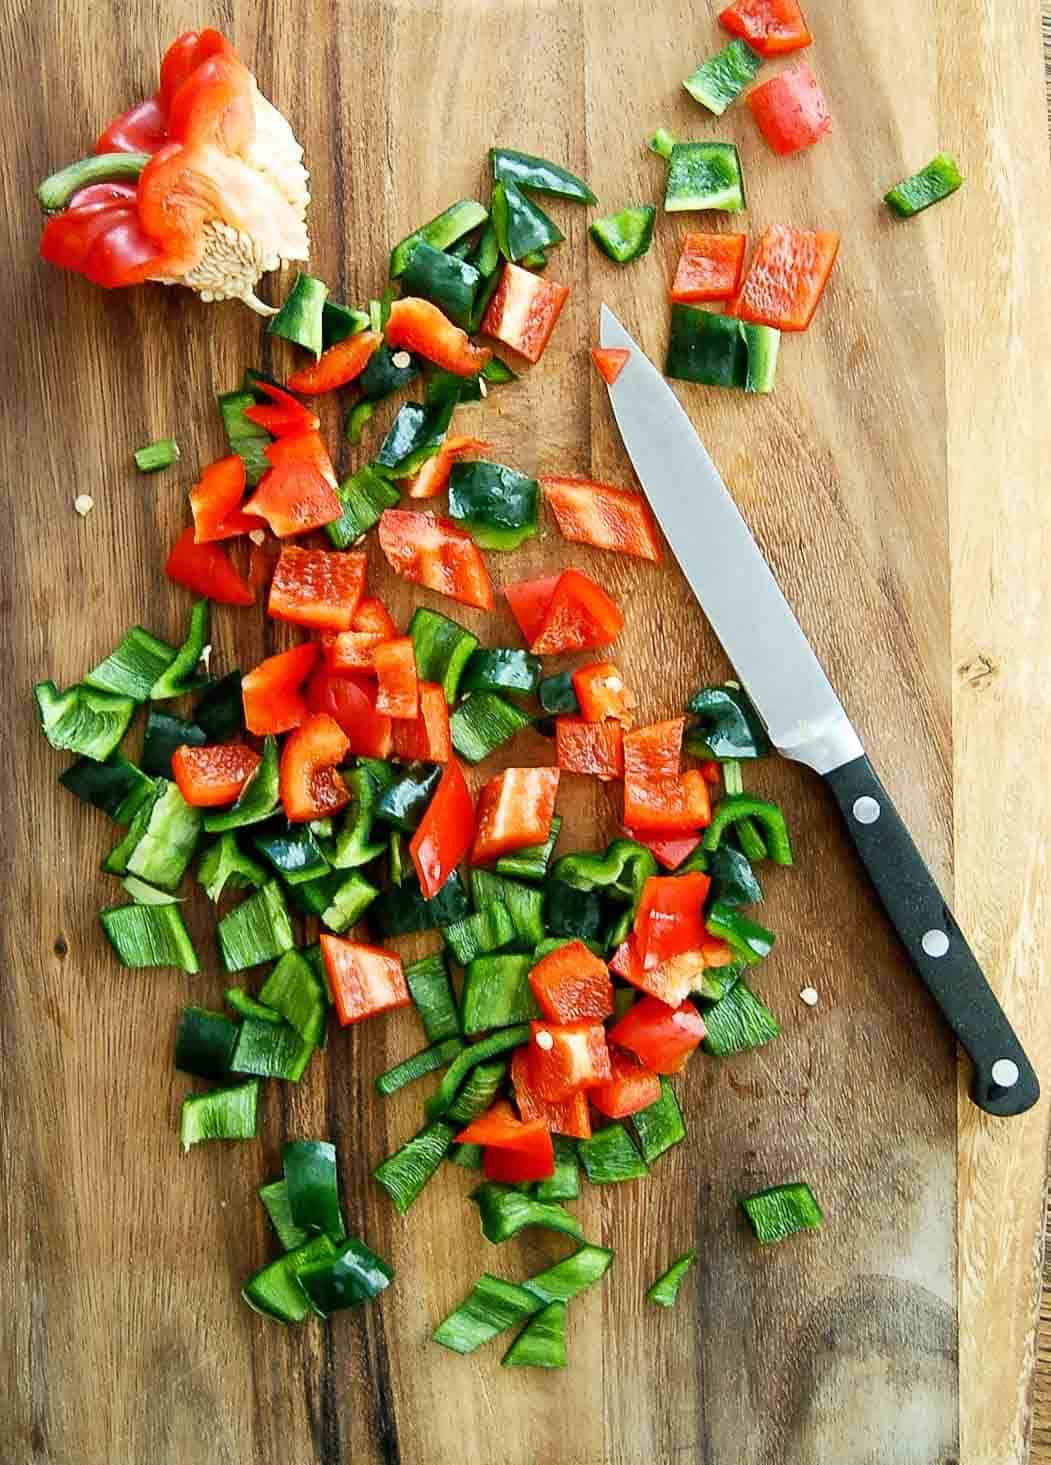 chopped pasillo and red pepper.